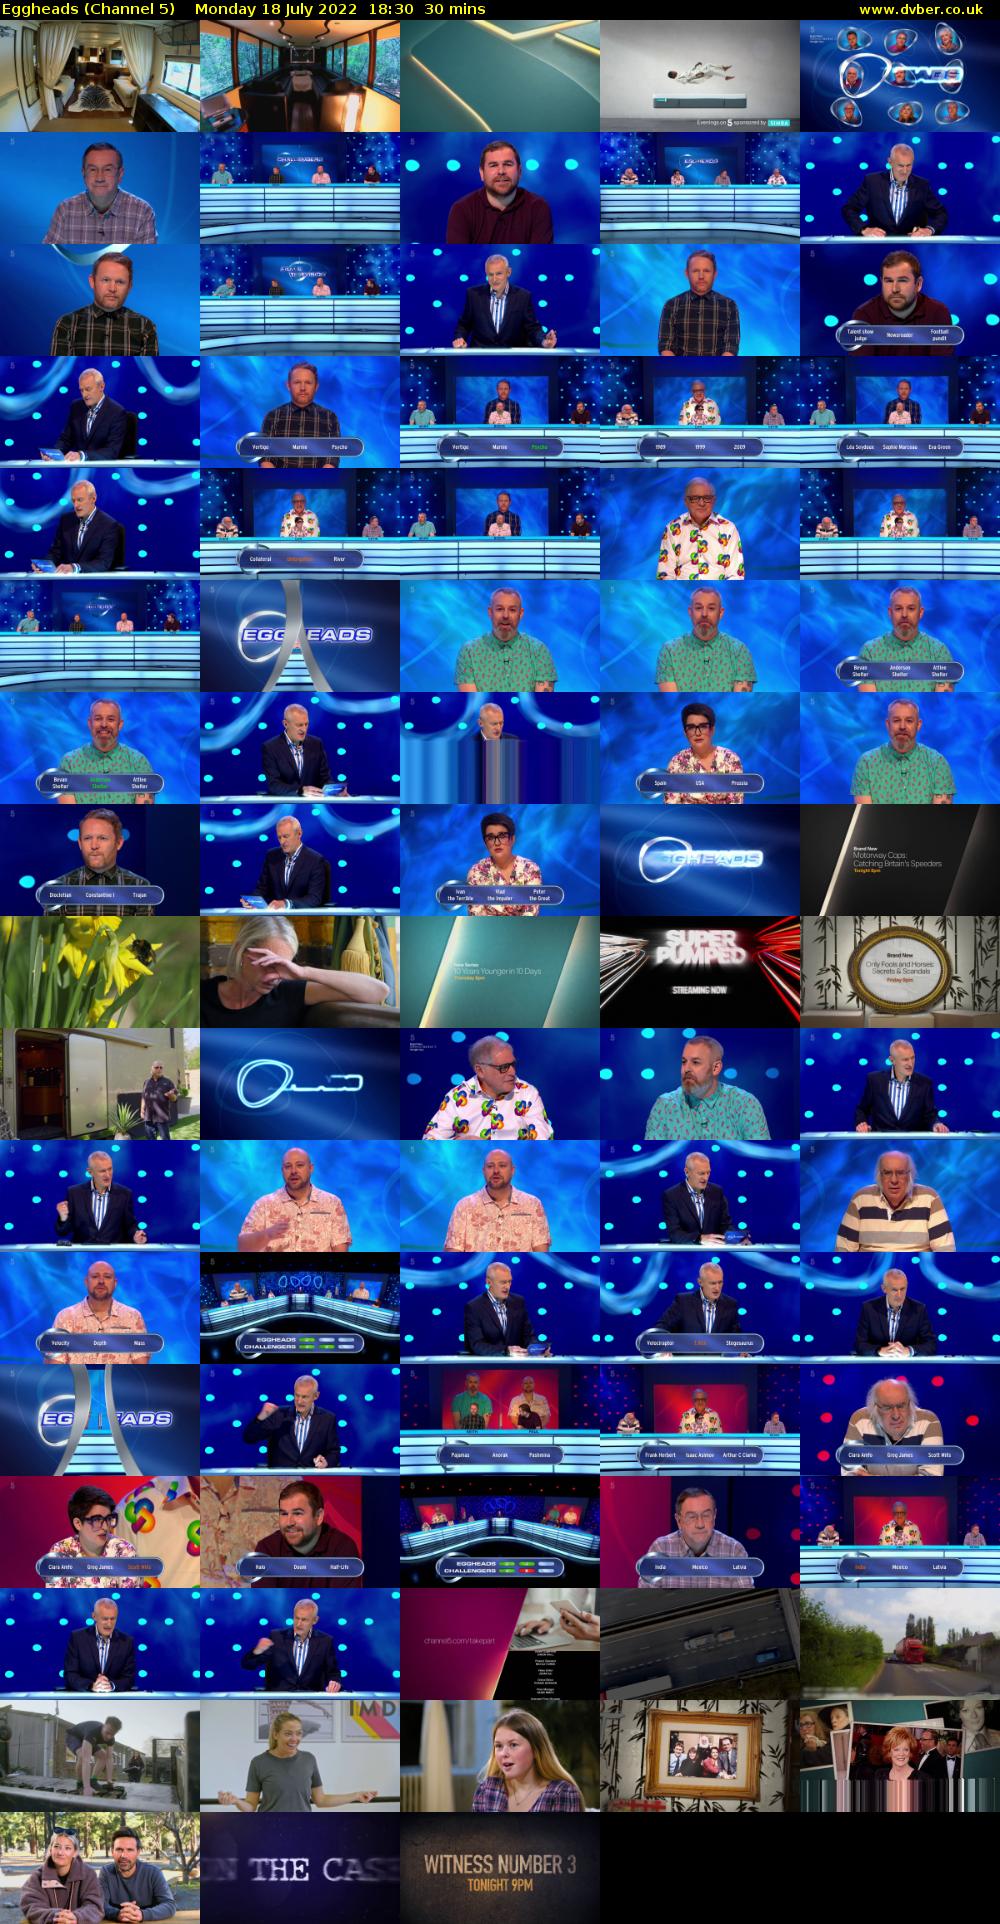 Eggheads (Channel 5) Monday 18 July 2022 18:30 - 19:00